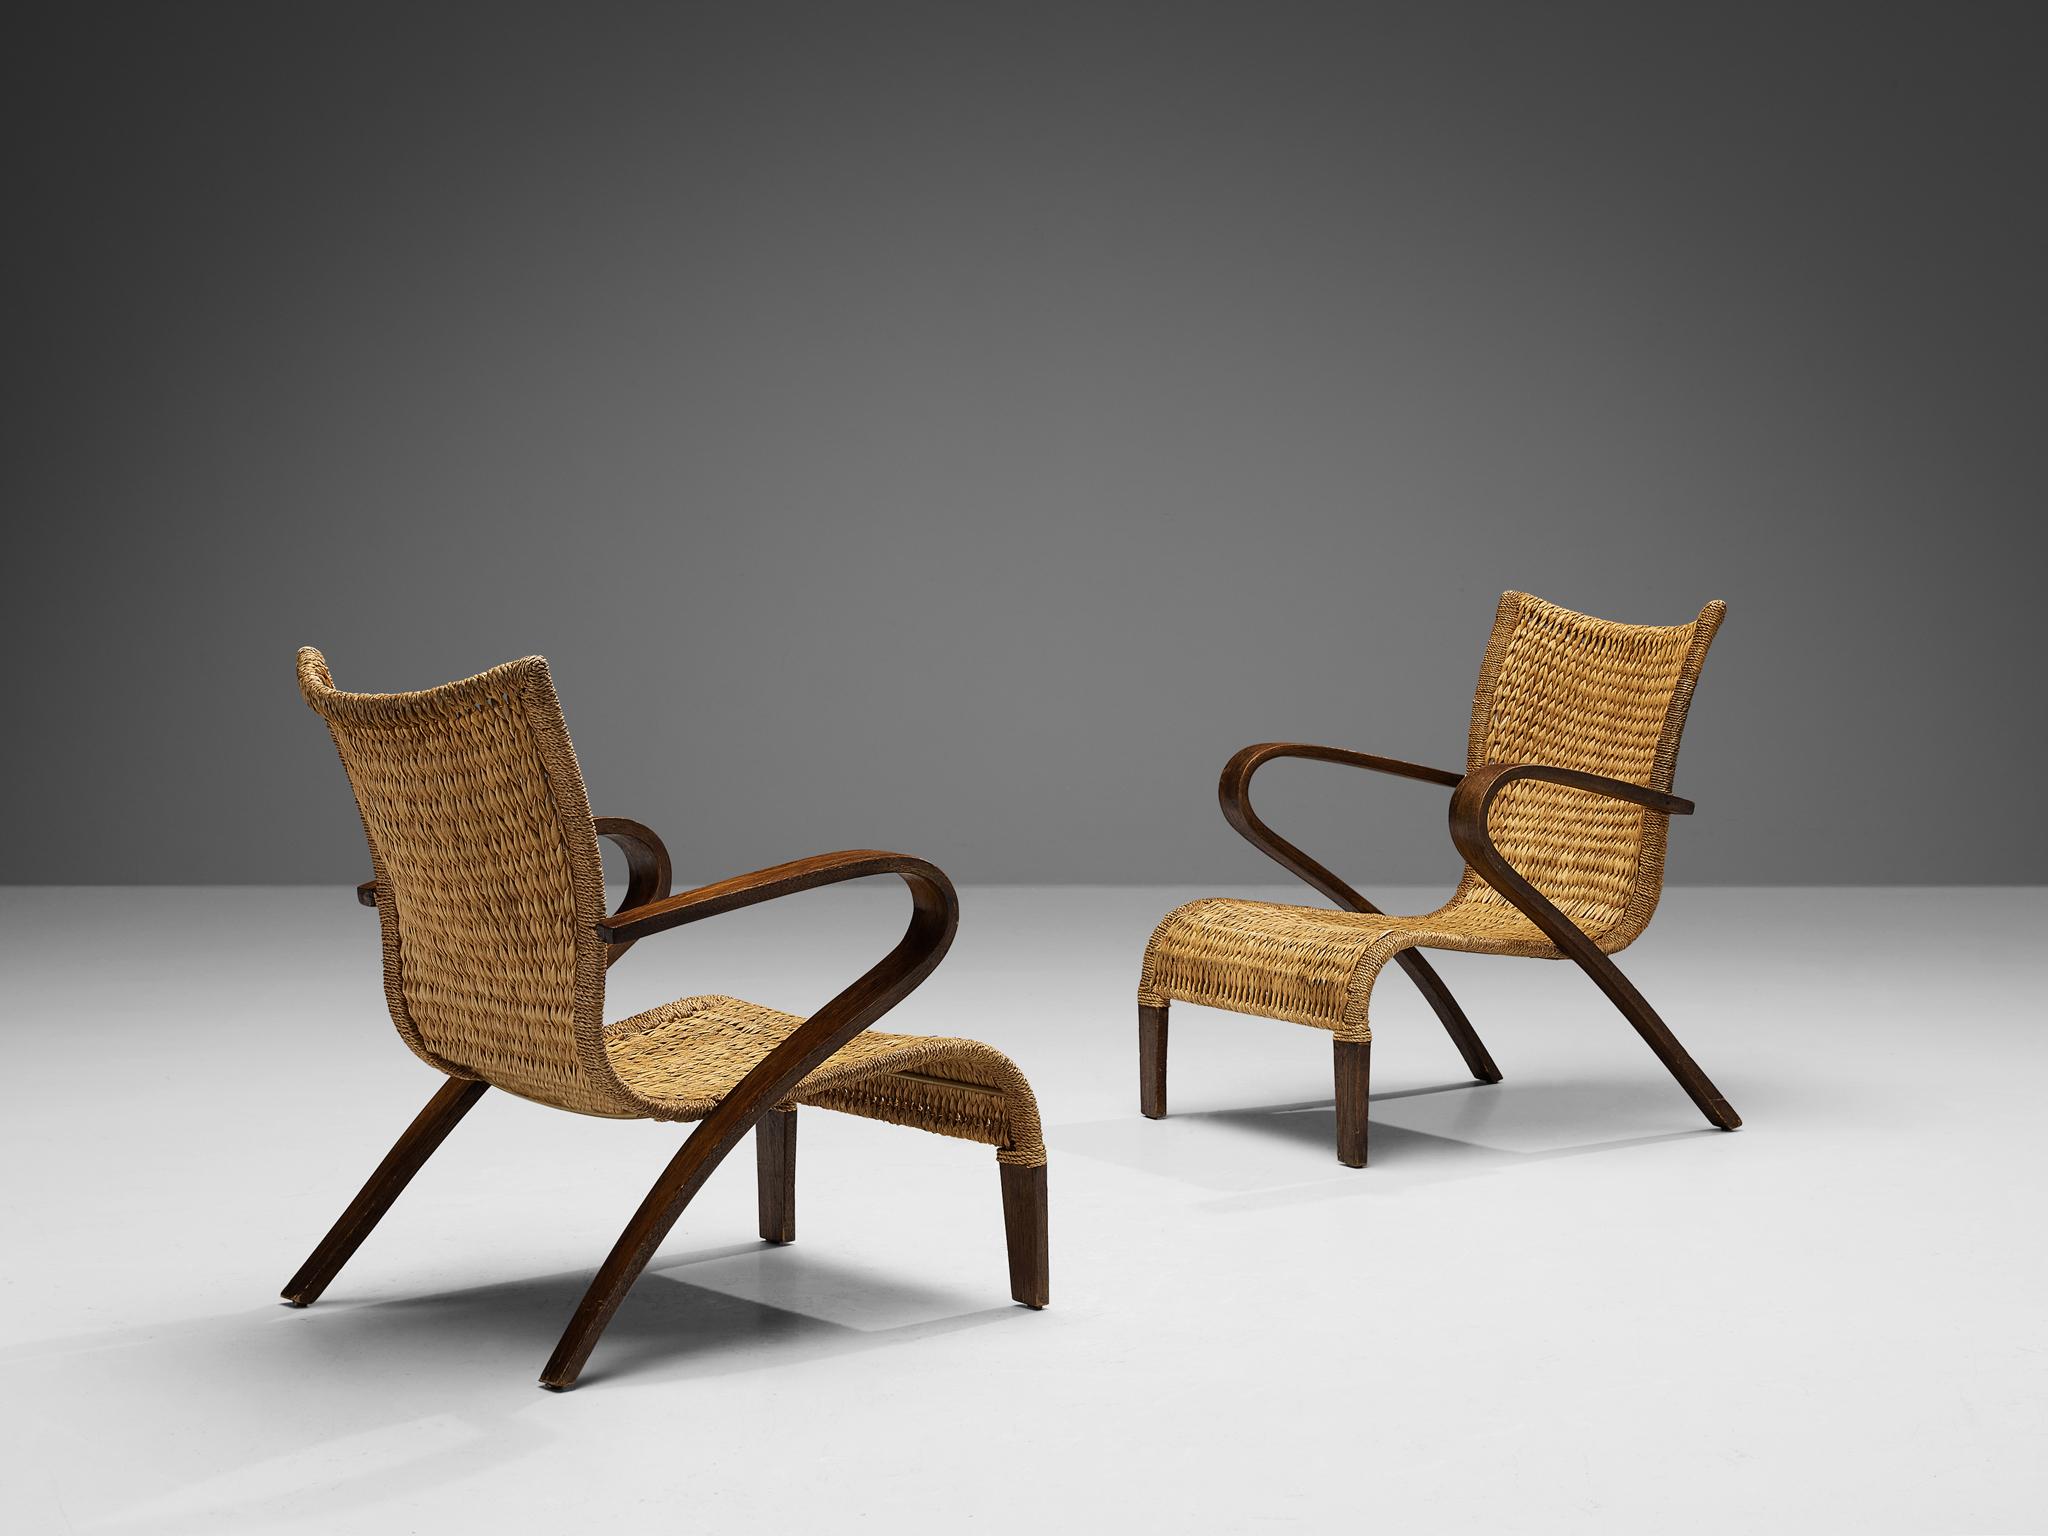 Pair of armchairs, beech, straw, France, 1950s

Pair of lounge chairs originating from 1950s France. These chairs feature an elegantly sculpted frame, which is executed in darkened beech wood. The seating and backrest are made of sturdy woven straw,